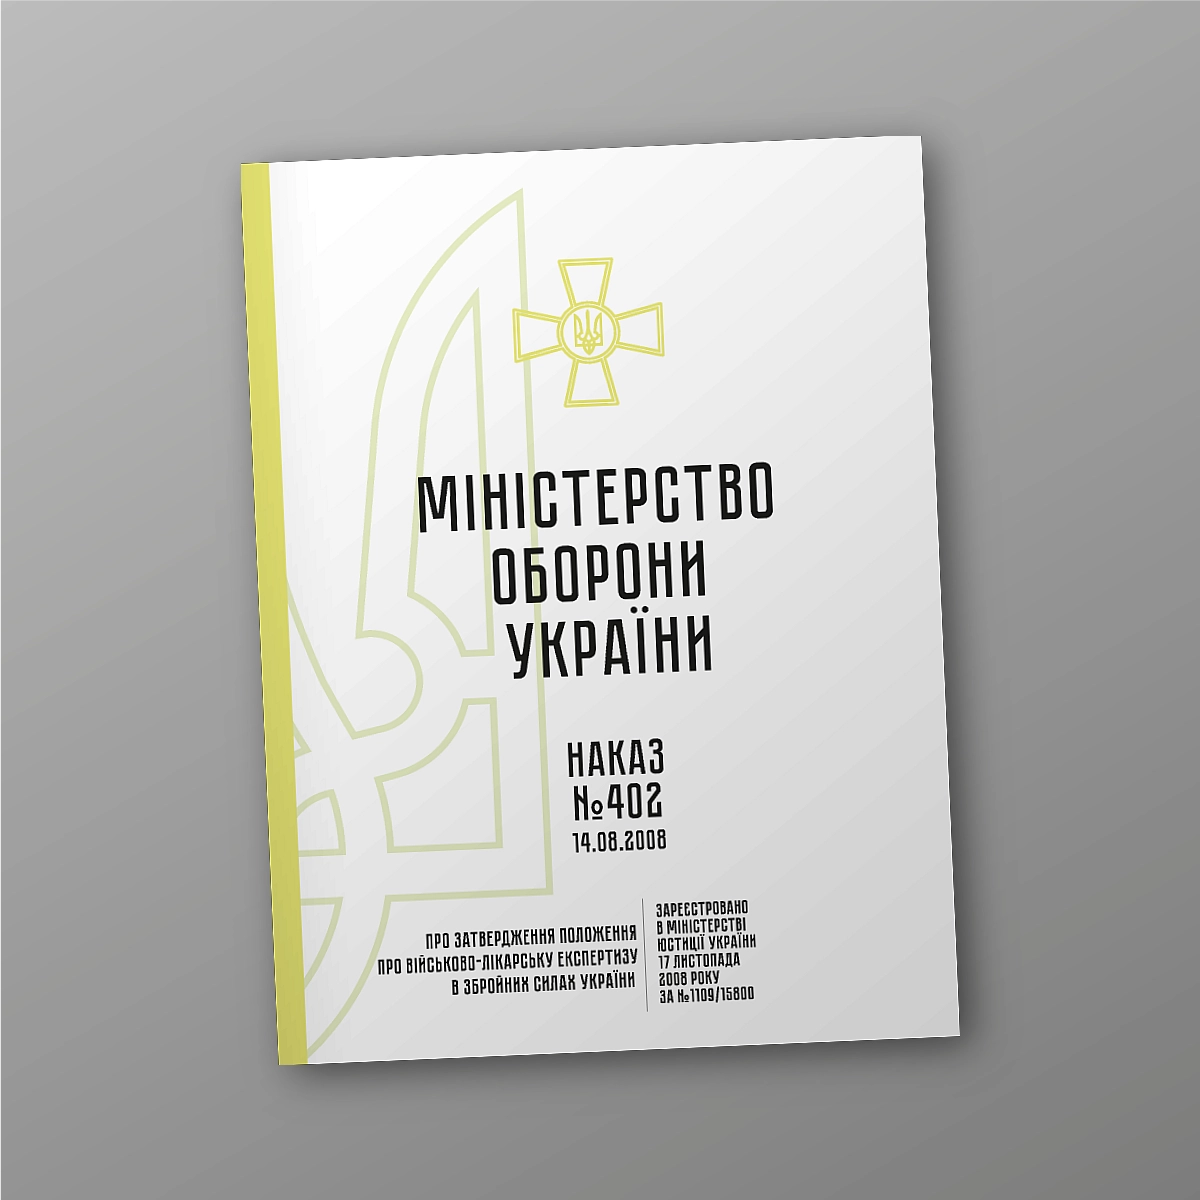 Order 402 + Attachments. On the approval of the Regulation on military medical examination in the Armed Forces of Ukraine | PrintTo: